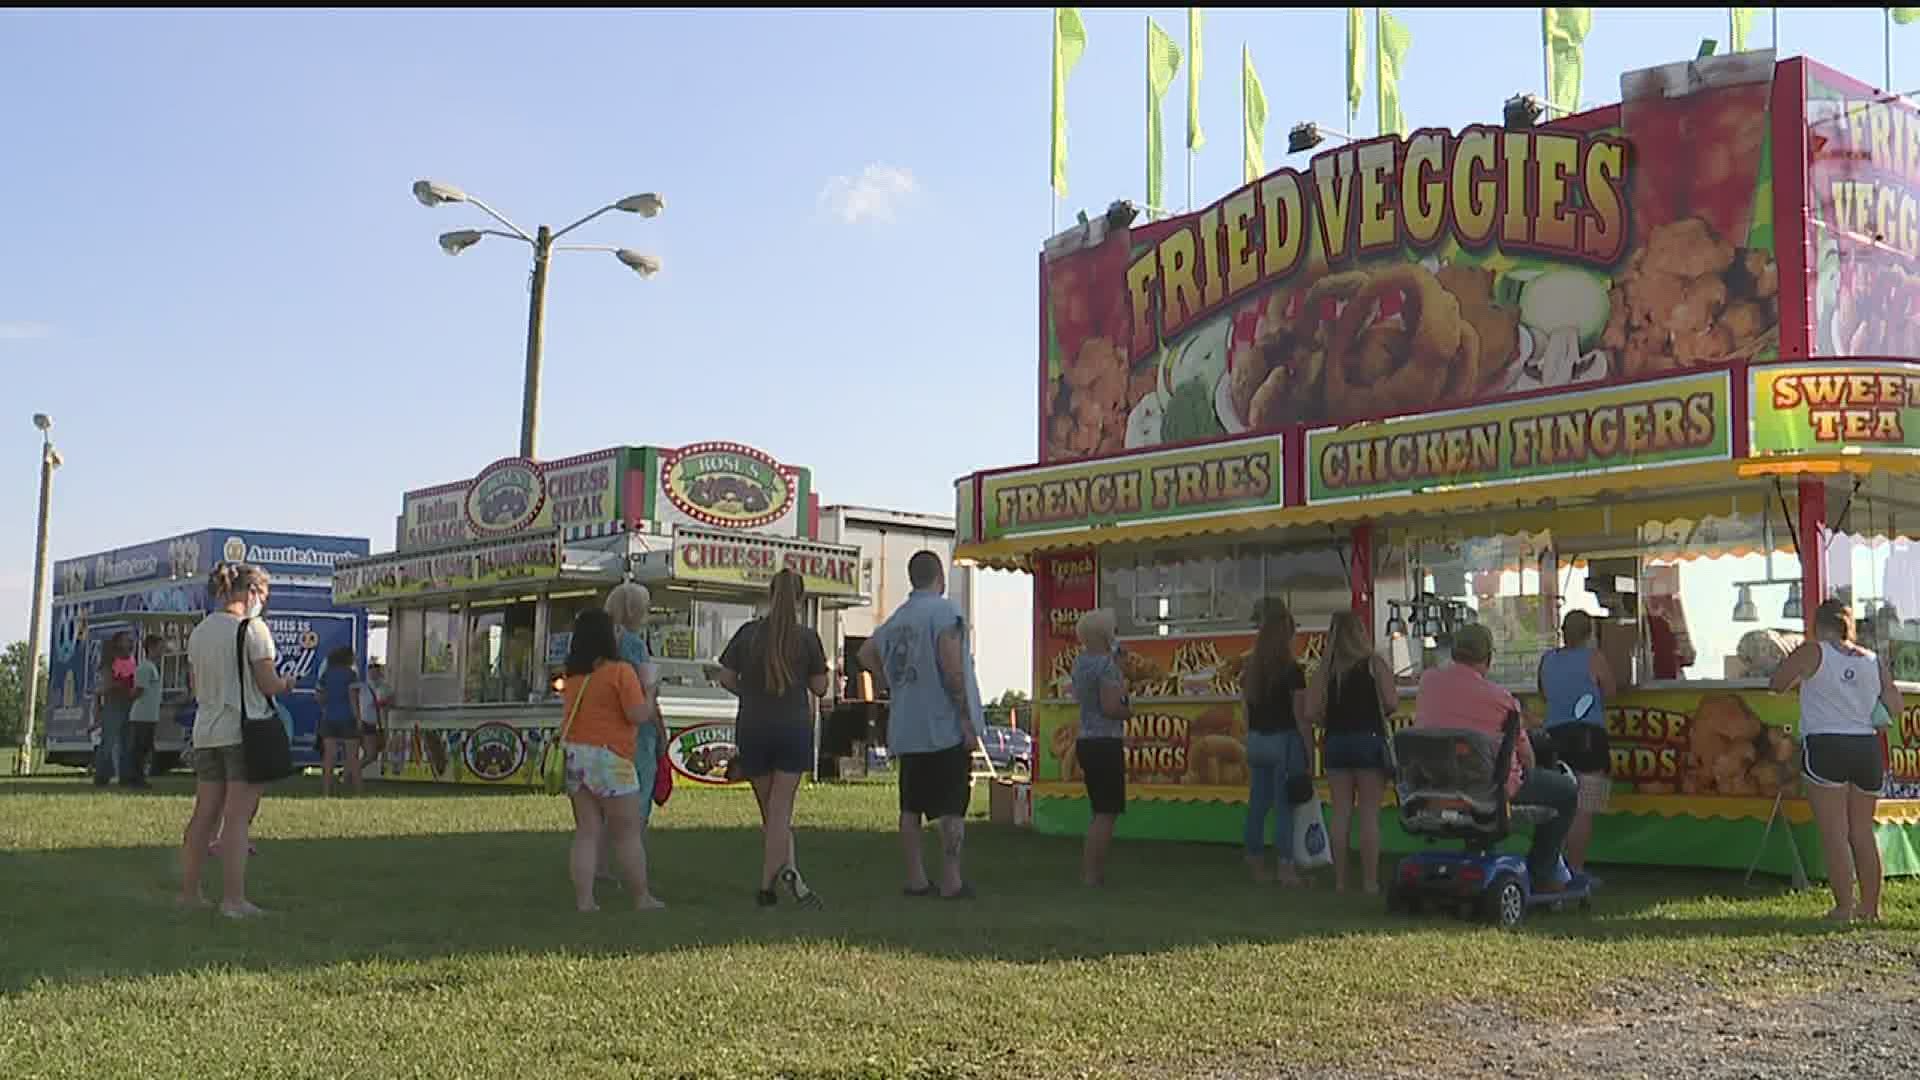 The Lebanon Area Fair runs through tomorrow. With no rides or games, organizers are trying to end the fair with a familiar boom -- a socially distant firework show.